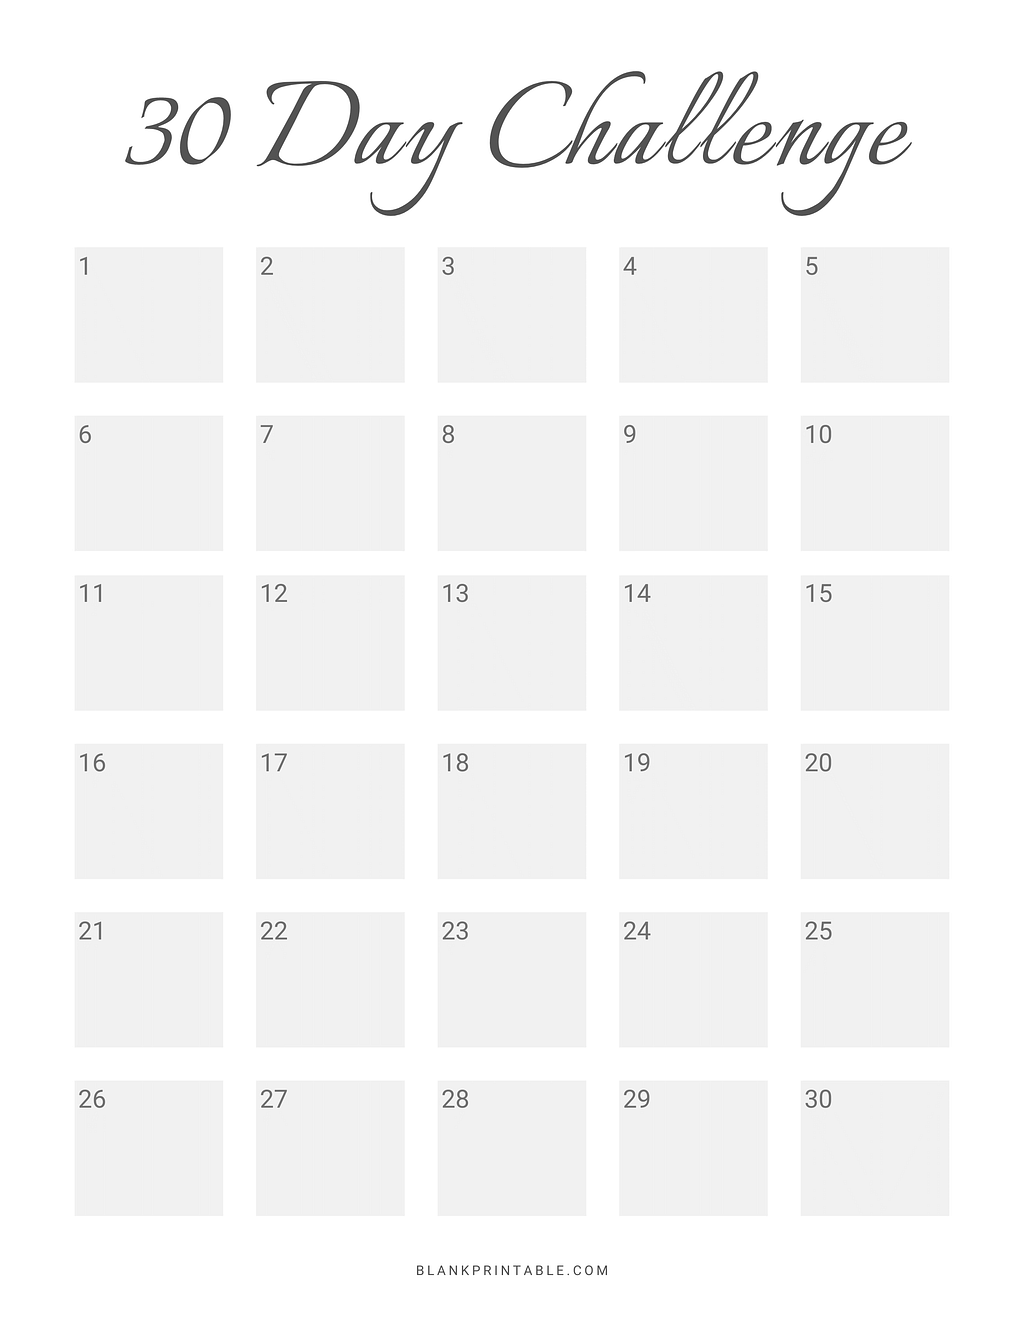 Blank Printable 30 Day Challenge Calendar to track your fitness. Use this template for workout, ab, plank, pushup, squat challenges.